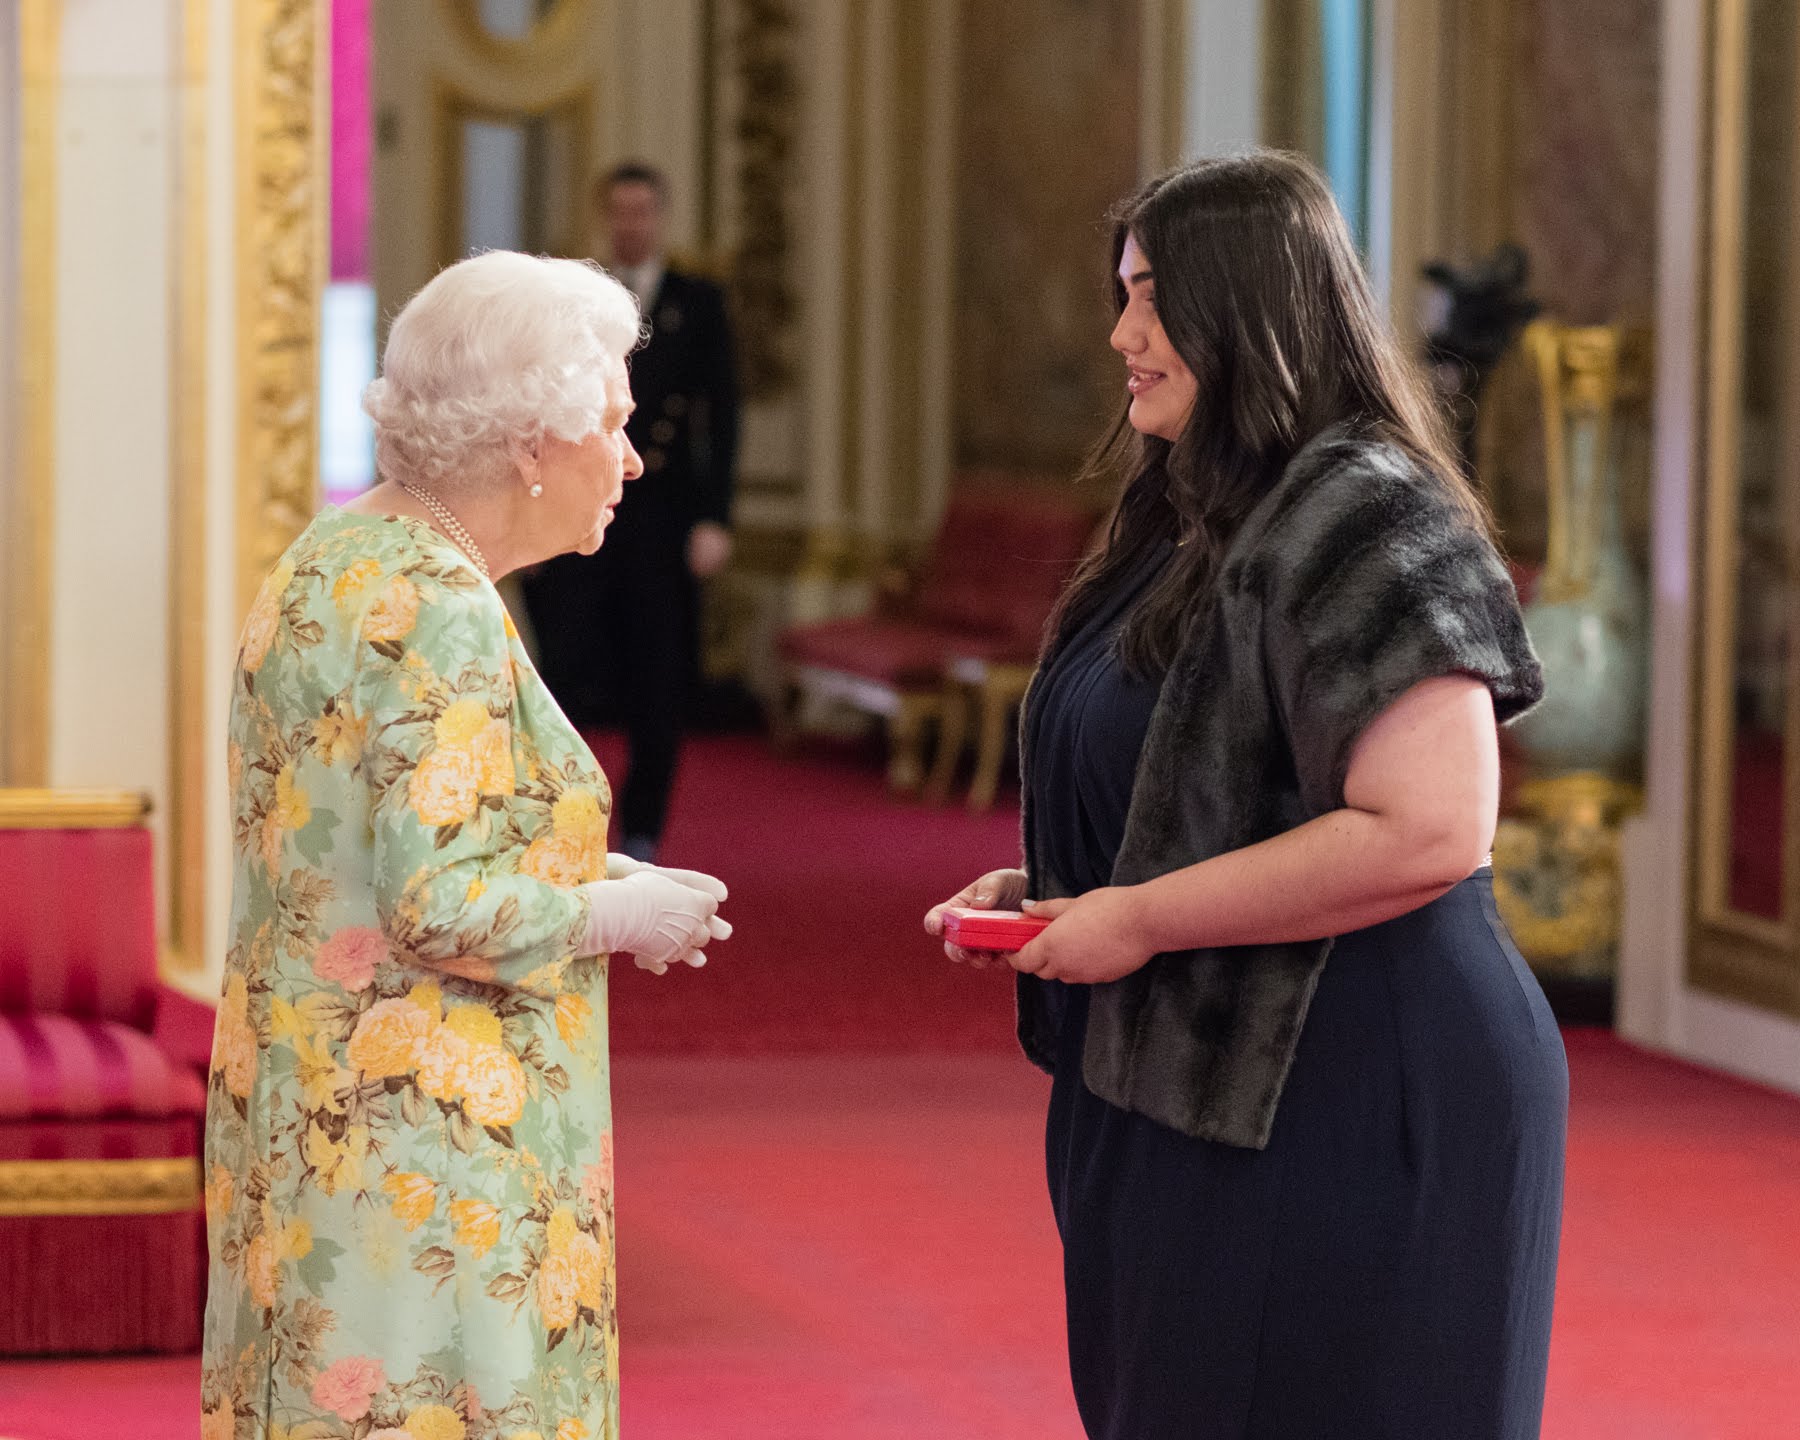 Caitlin Figueiredo 2018 Queen's Young Leader from Australia